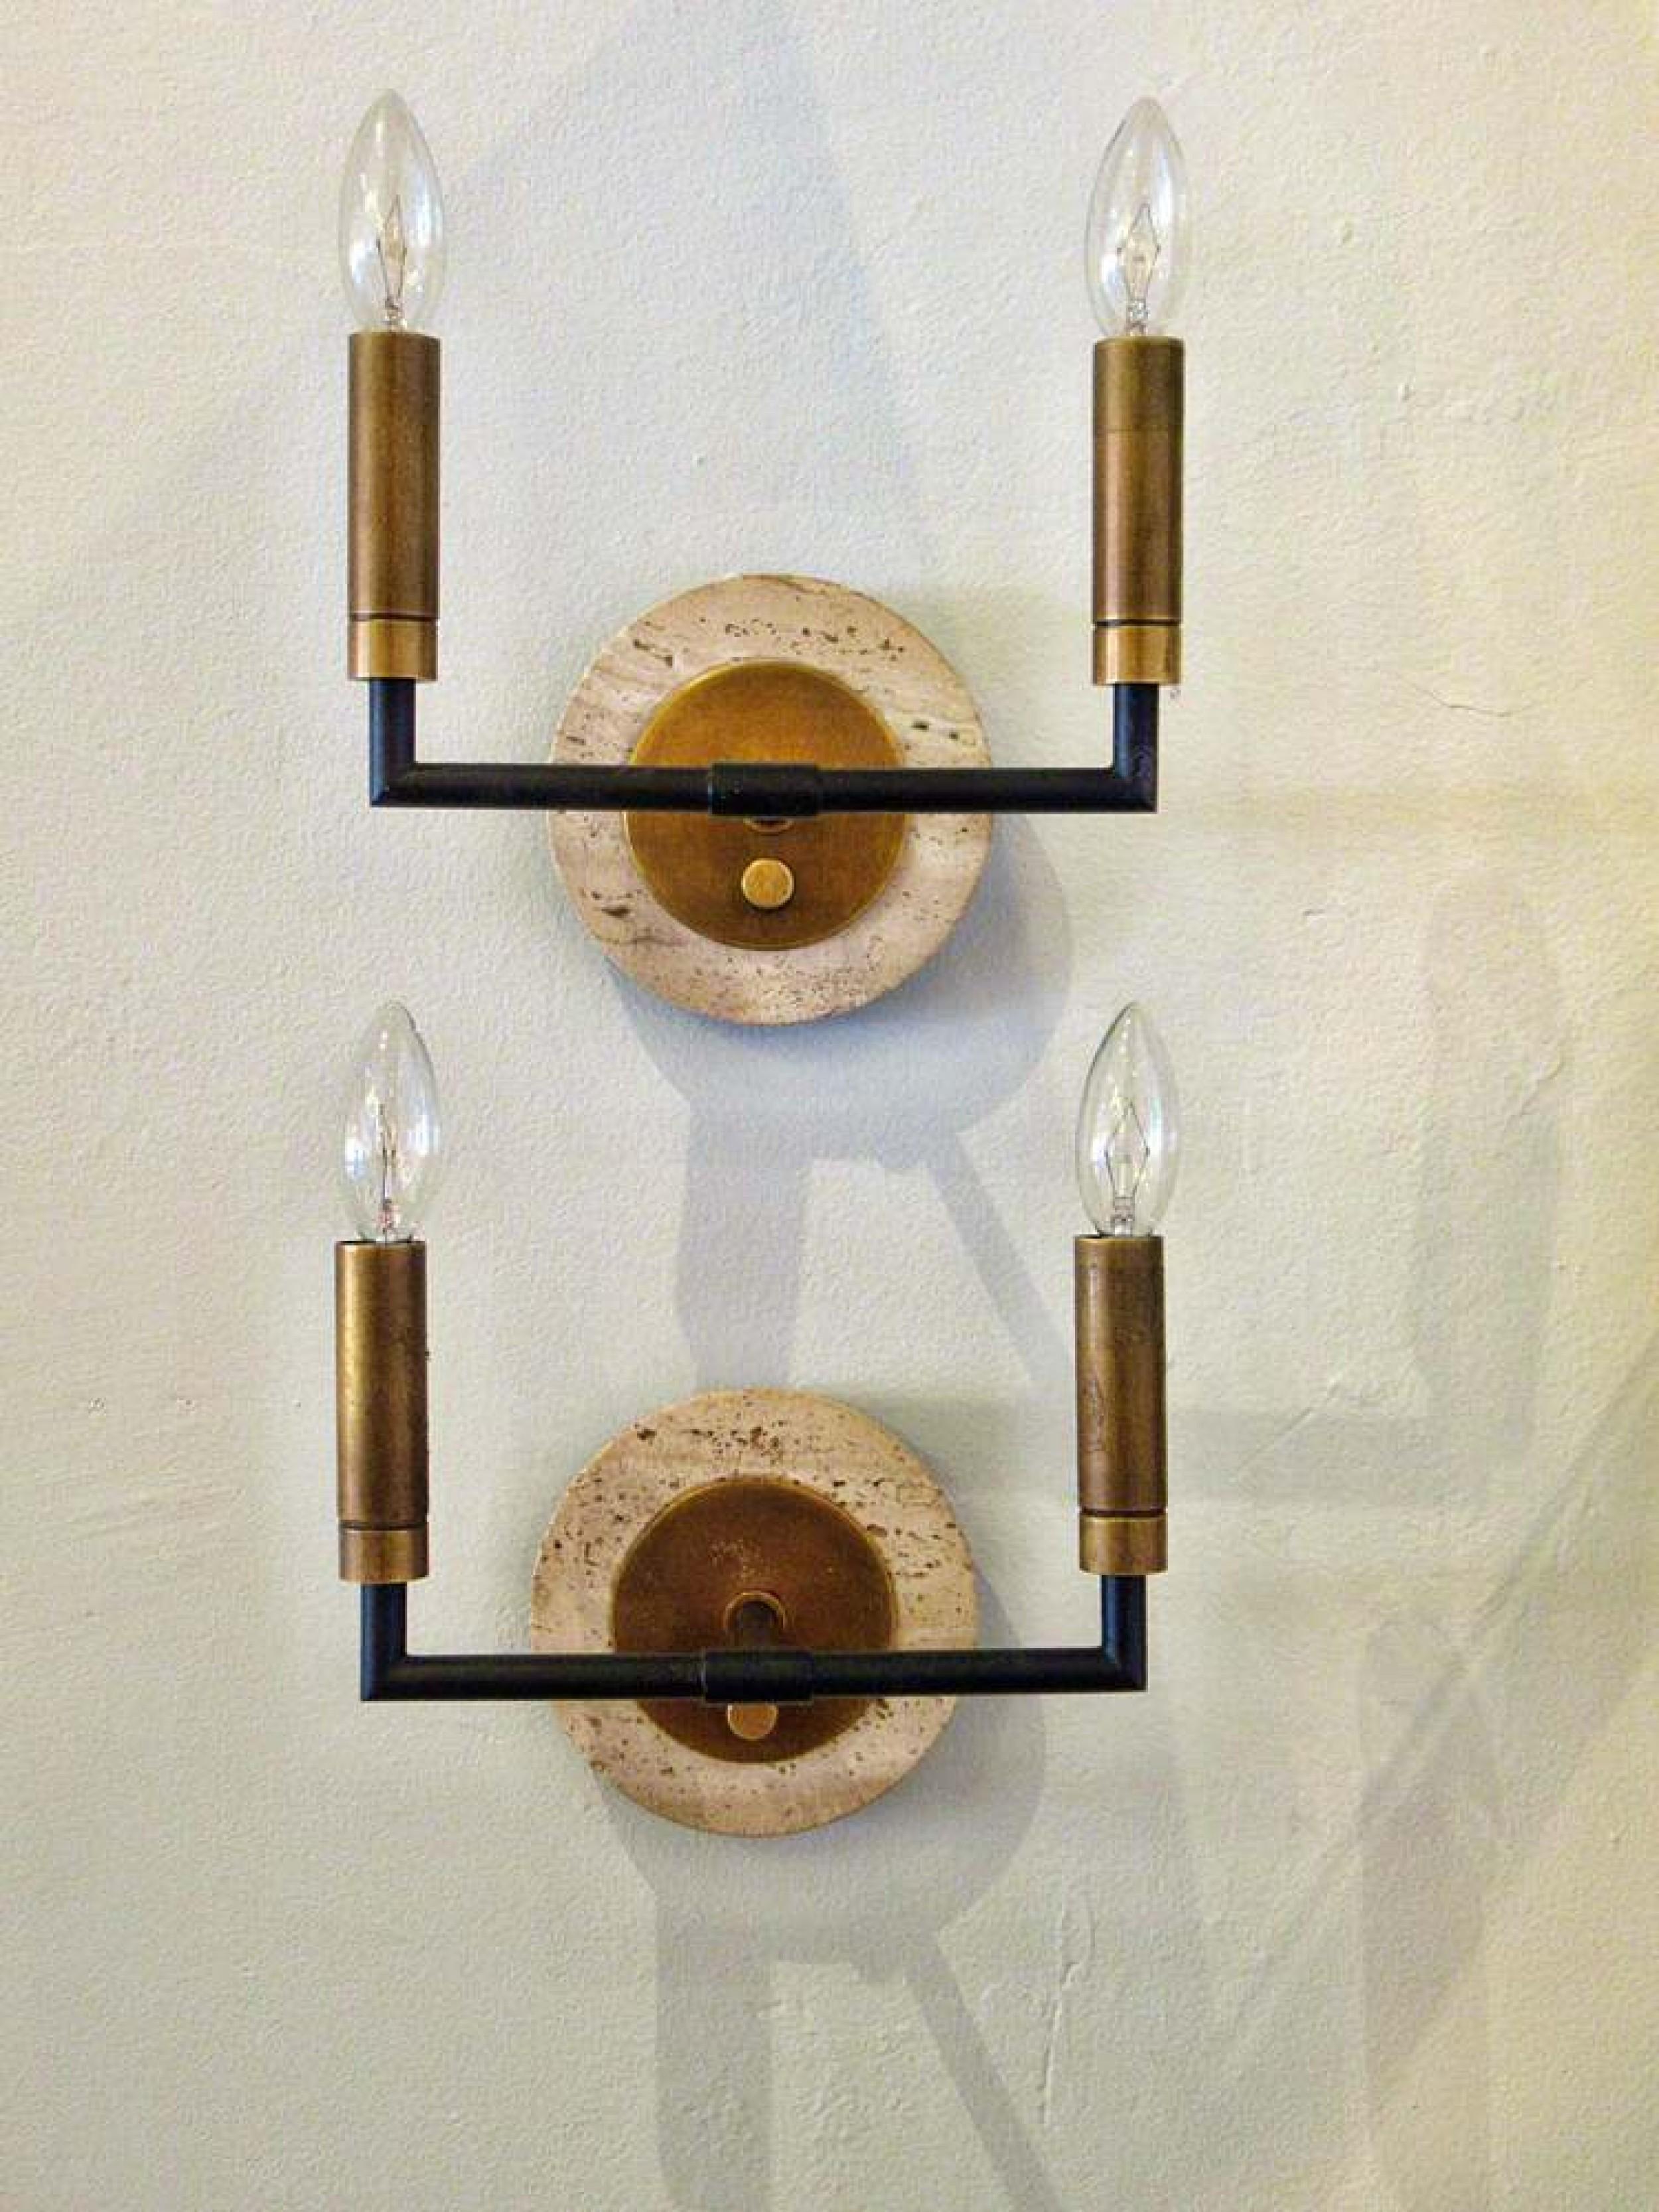 PAIR of midcentury Italian Modern (1950s) two-light wall sconces with a black metal cross bar connected to two burshed gilt metal lights, mounted on a travertine wall plate. (PRICED AS PAIR).